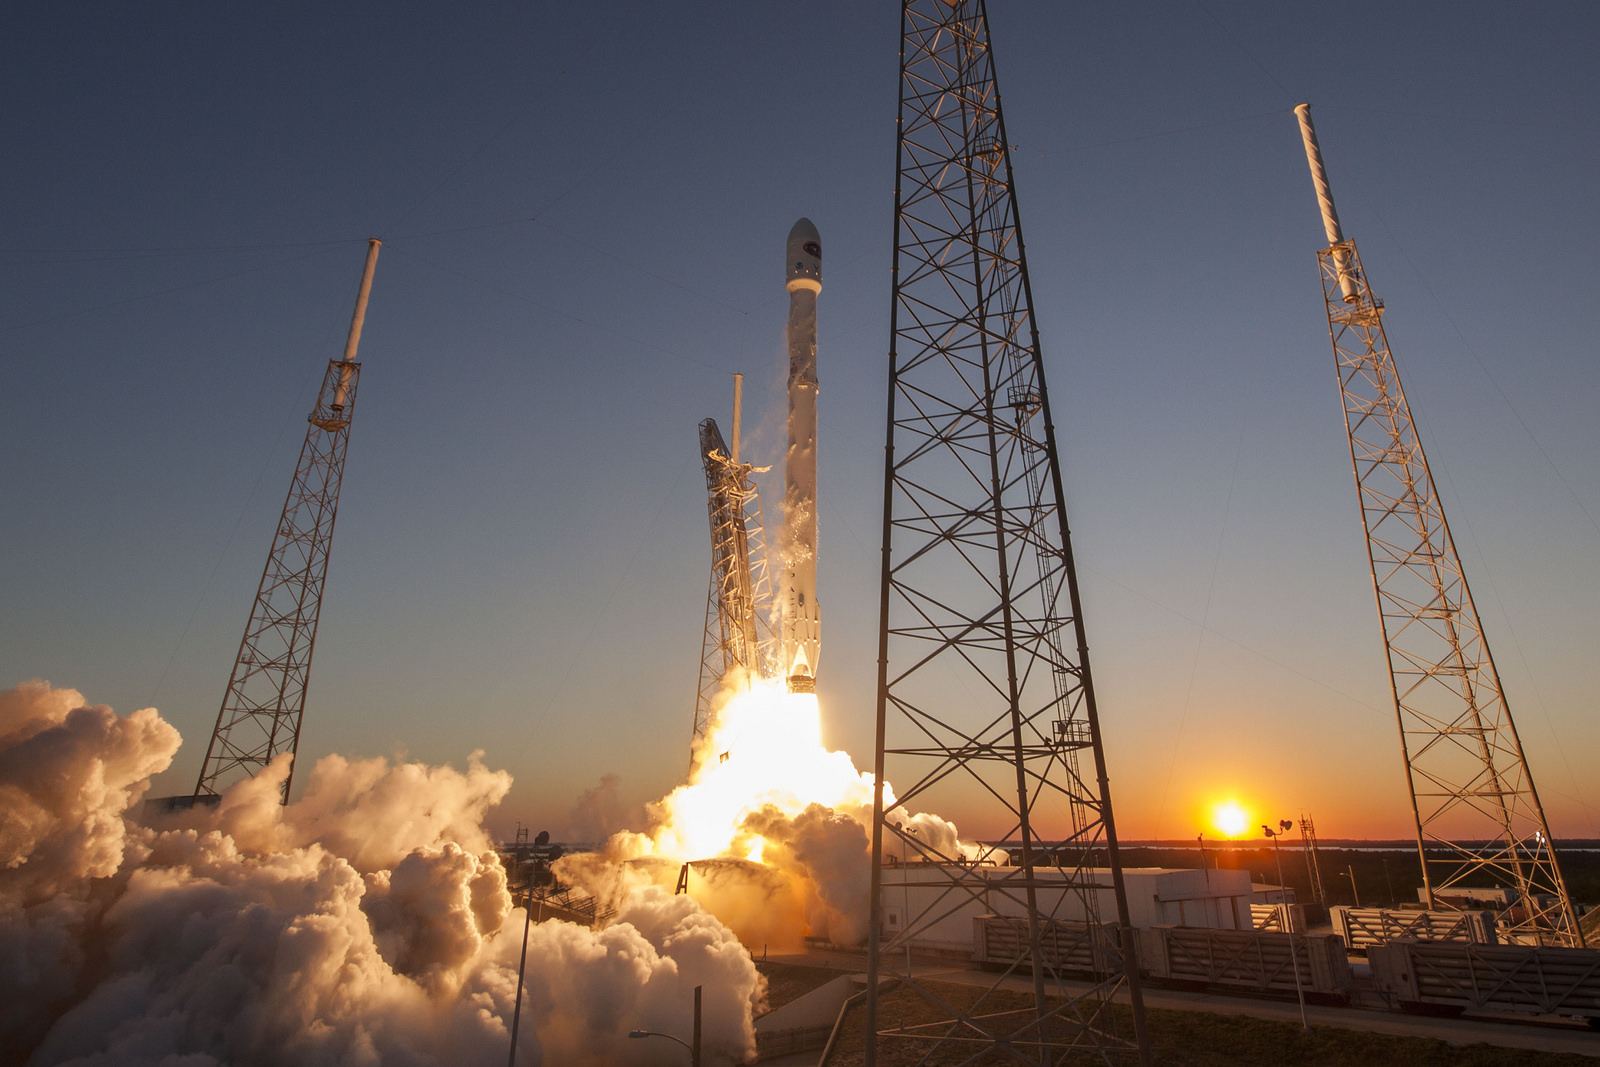 spacex Falcon 9 lifted off from SpaceX Launch Complex